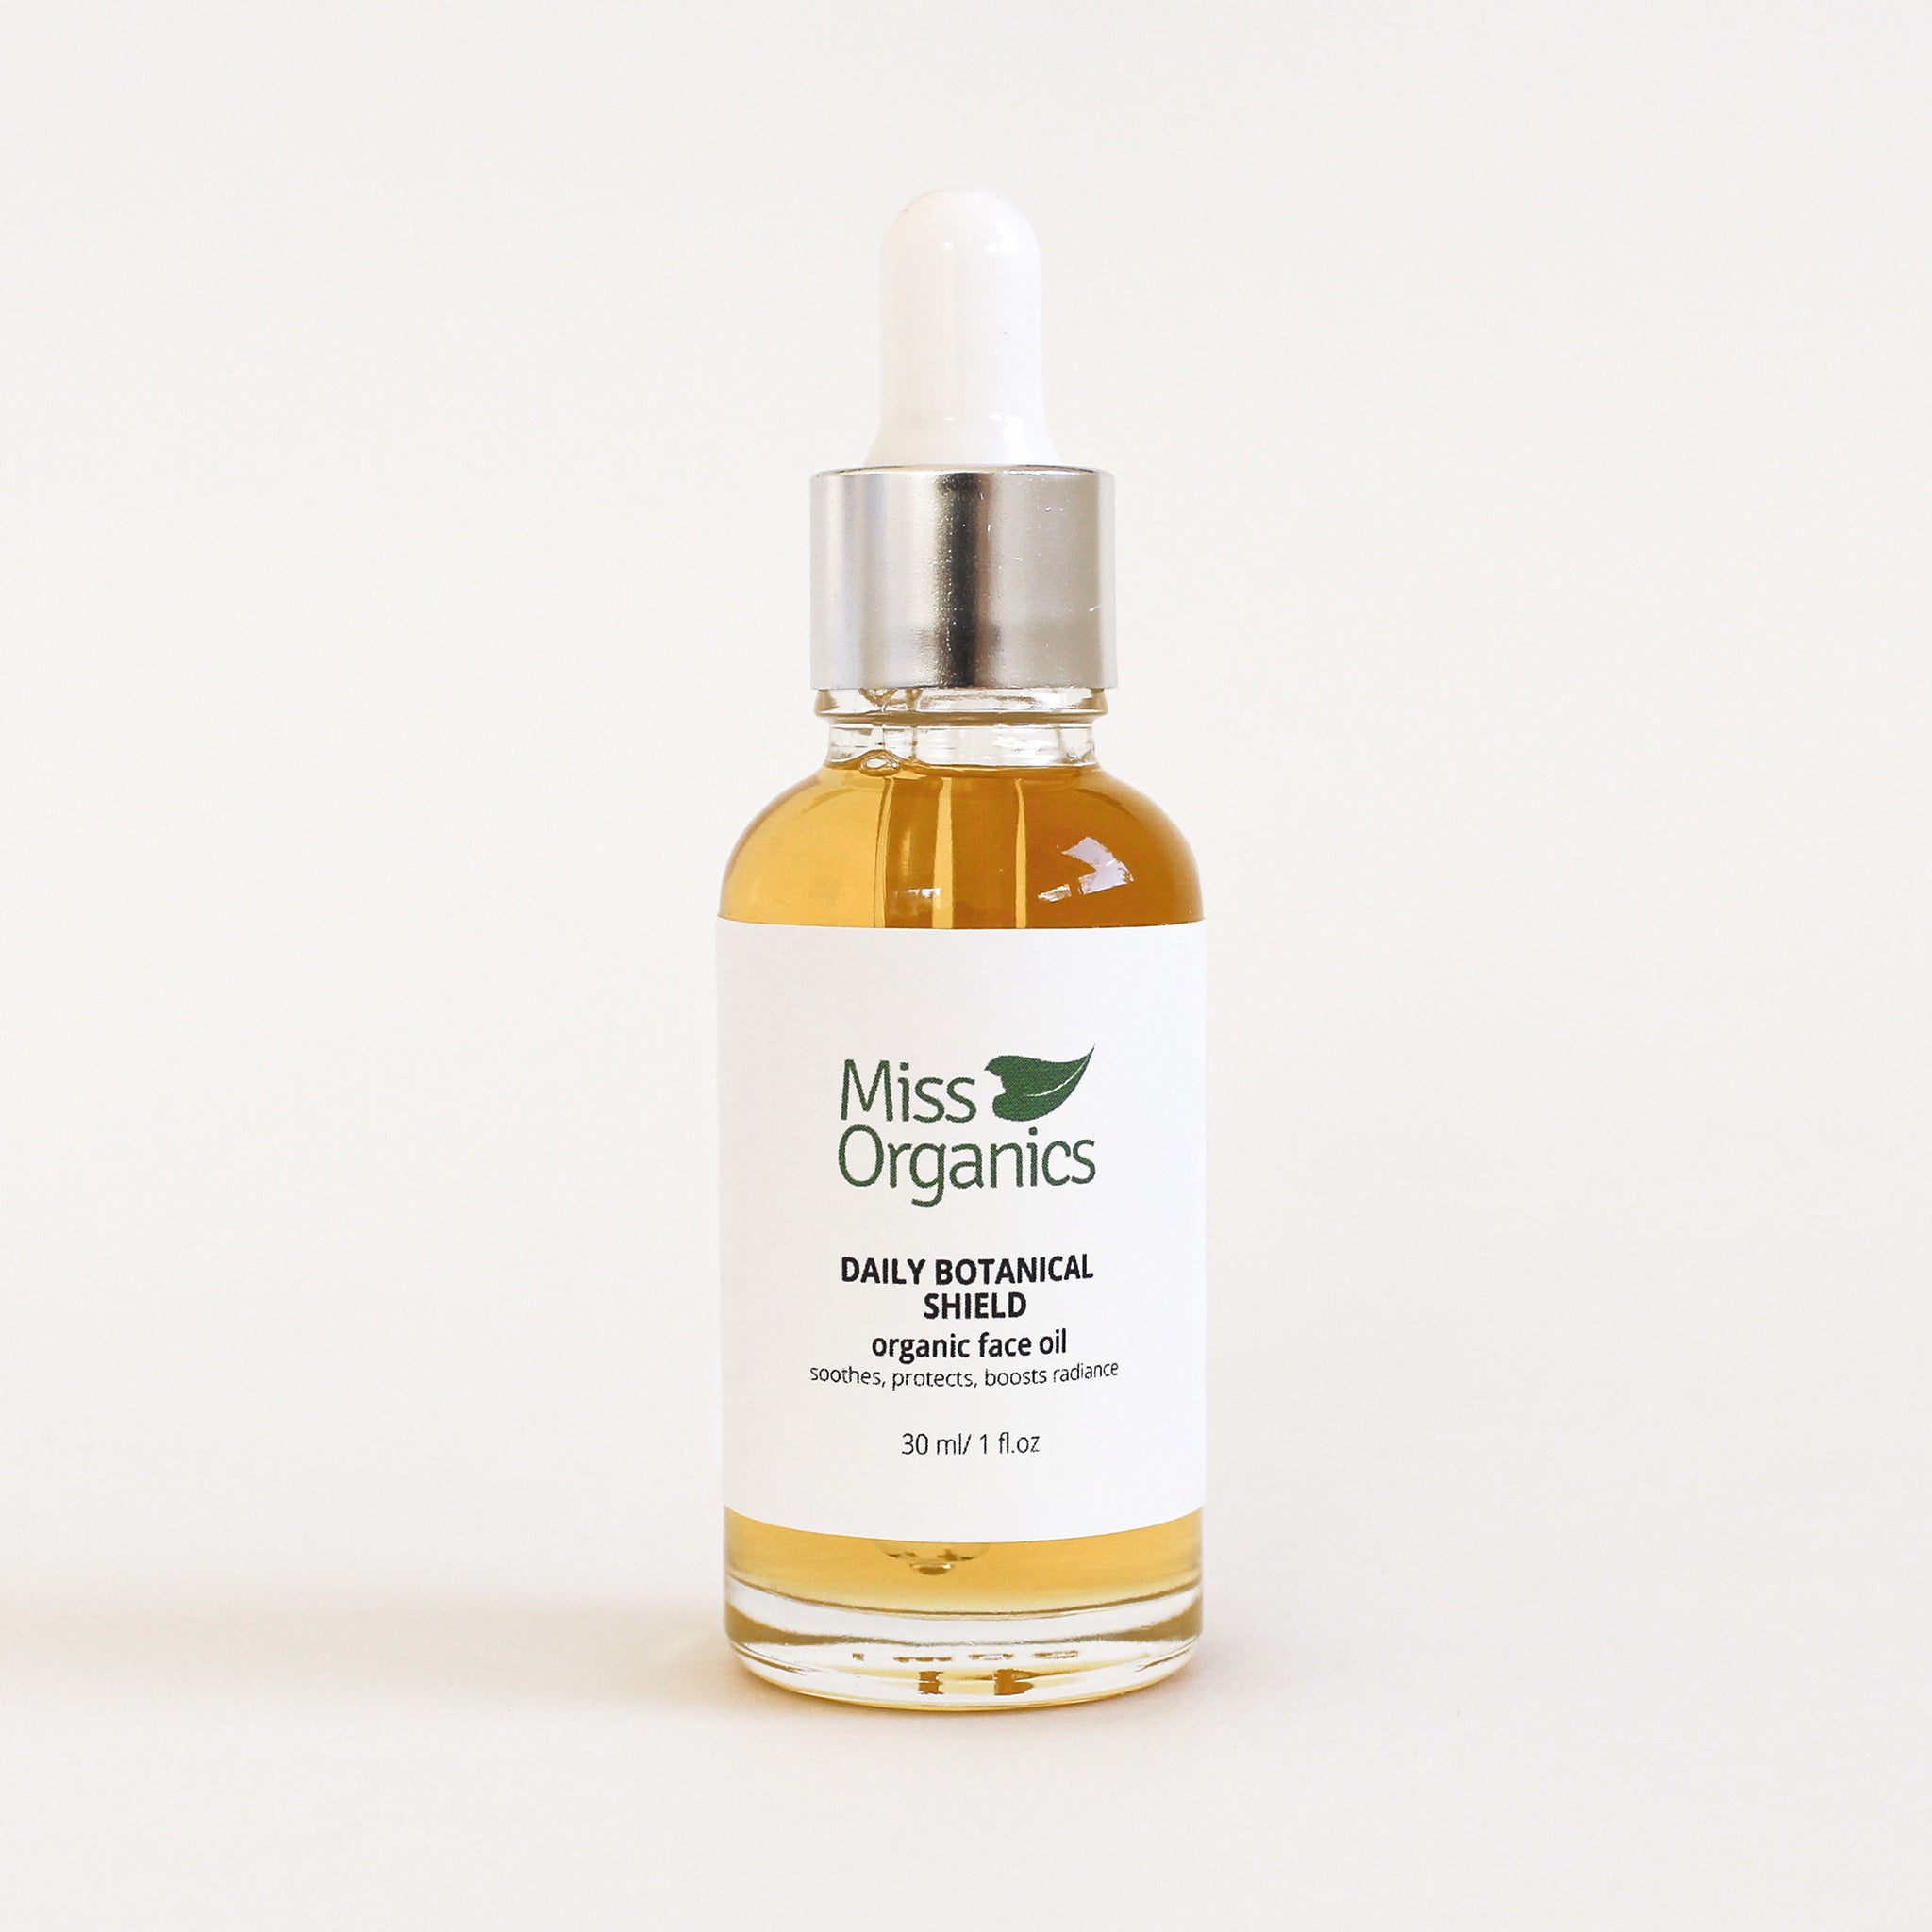 Daily Botanical Shield Organic Face Oil in glass bottle on cream background